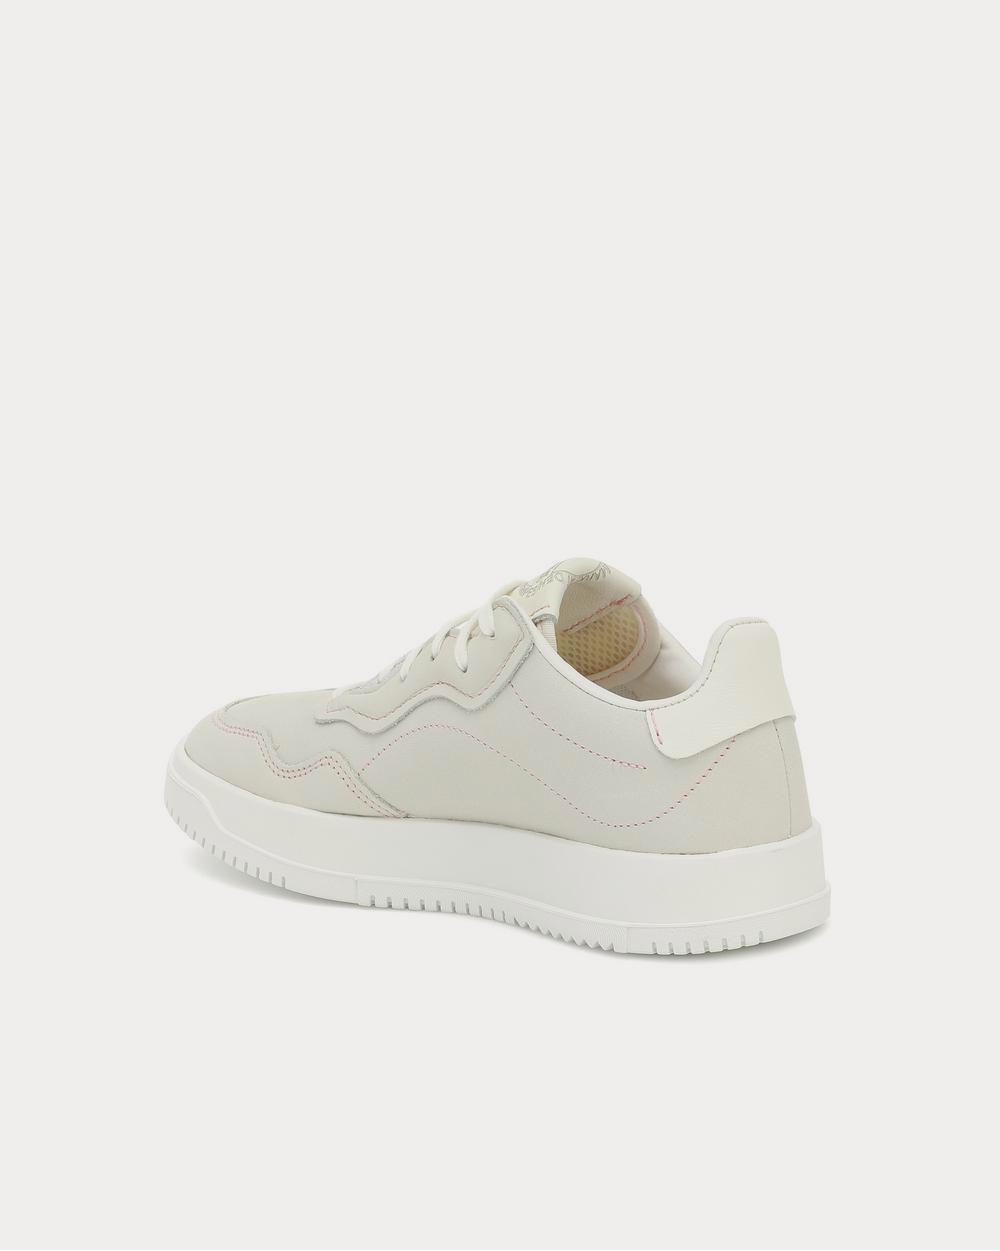 Adidas - SC Premiere leather white Low Top Sneakers